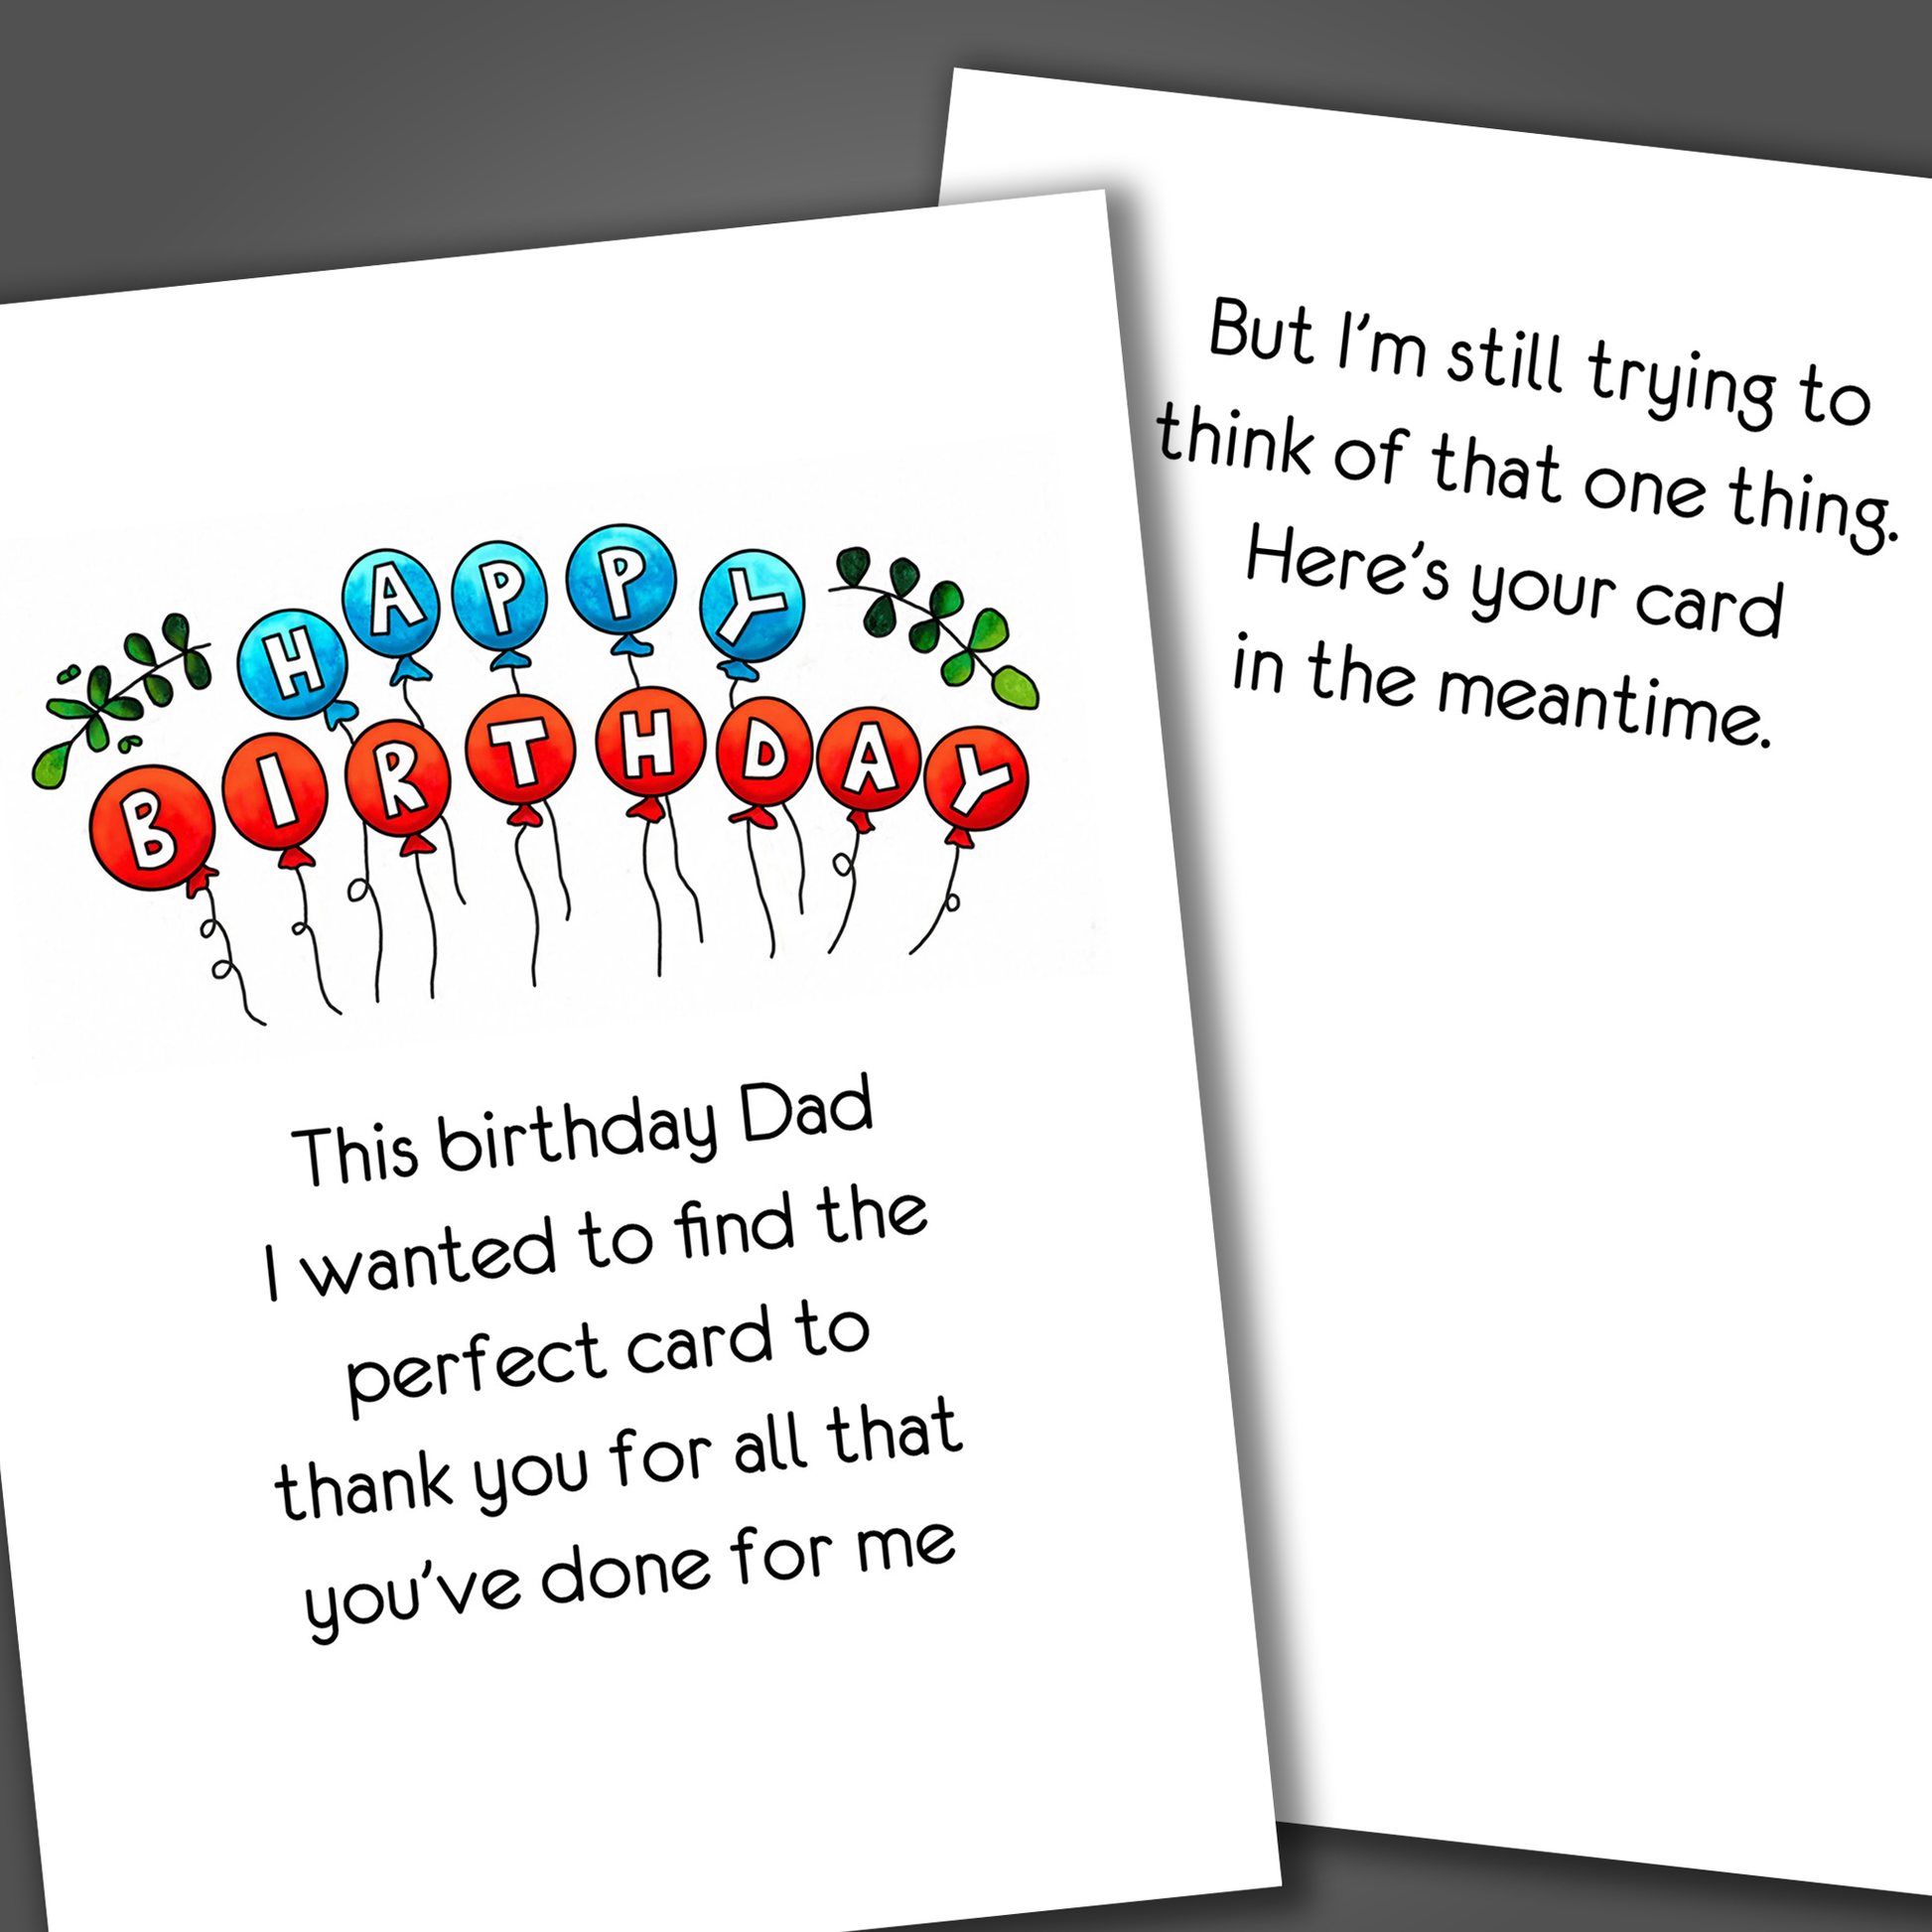 Funny happy birthday card for dad with red and blue balloons on the front of the card and a funny joke inside that makes fun of dad.